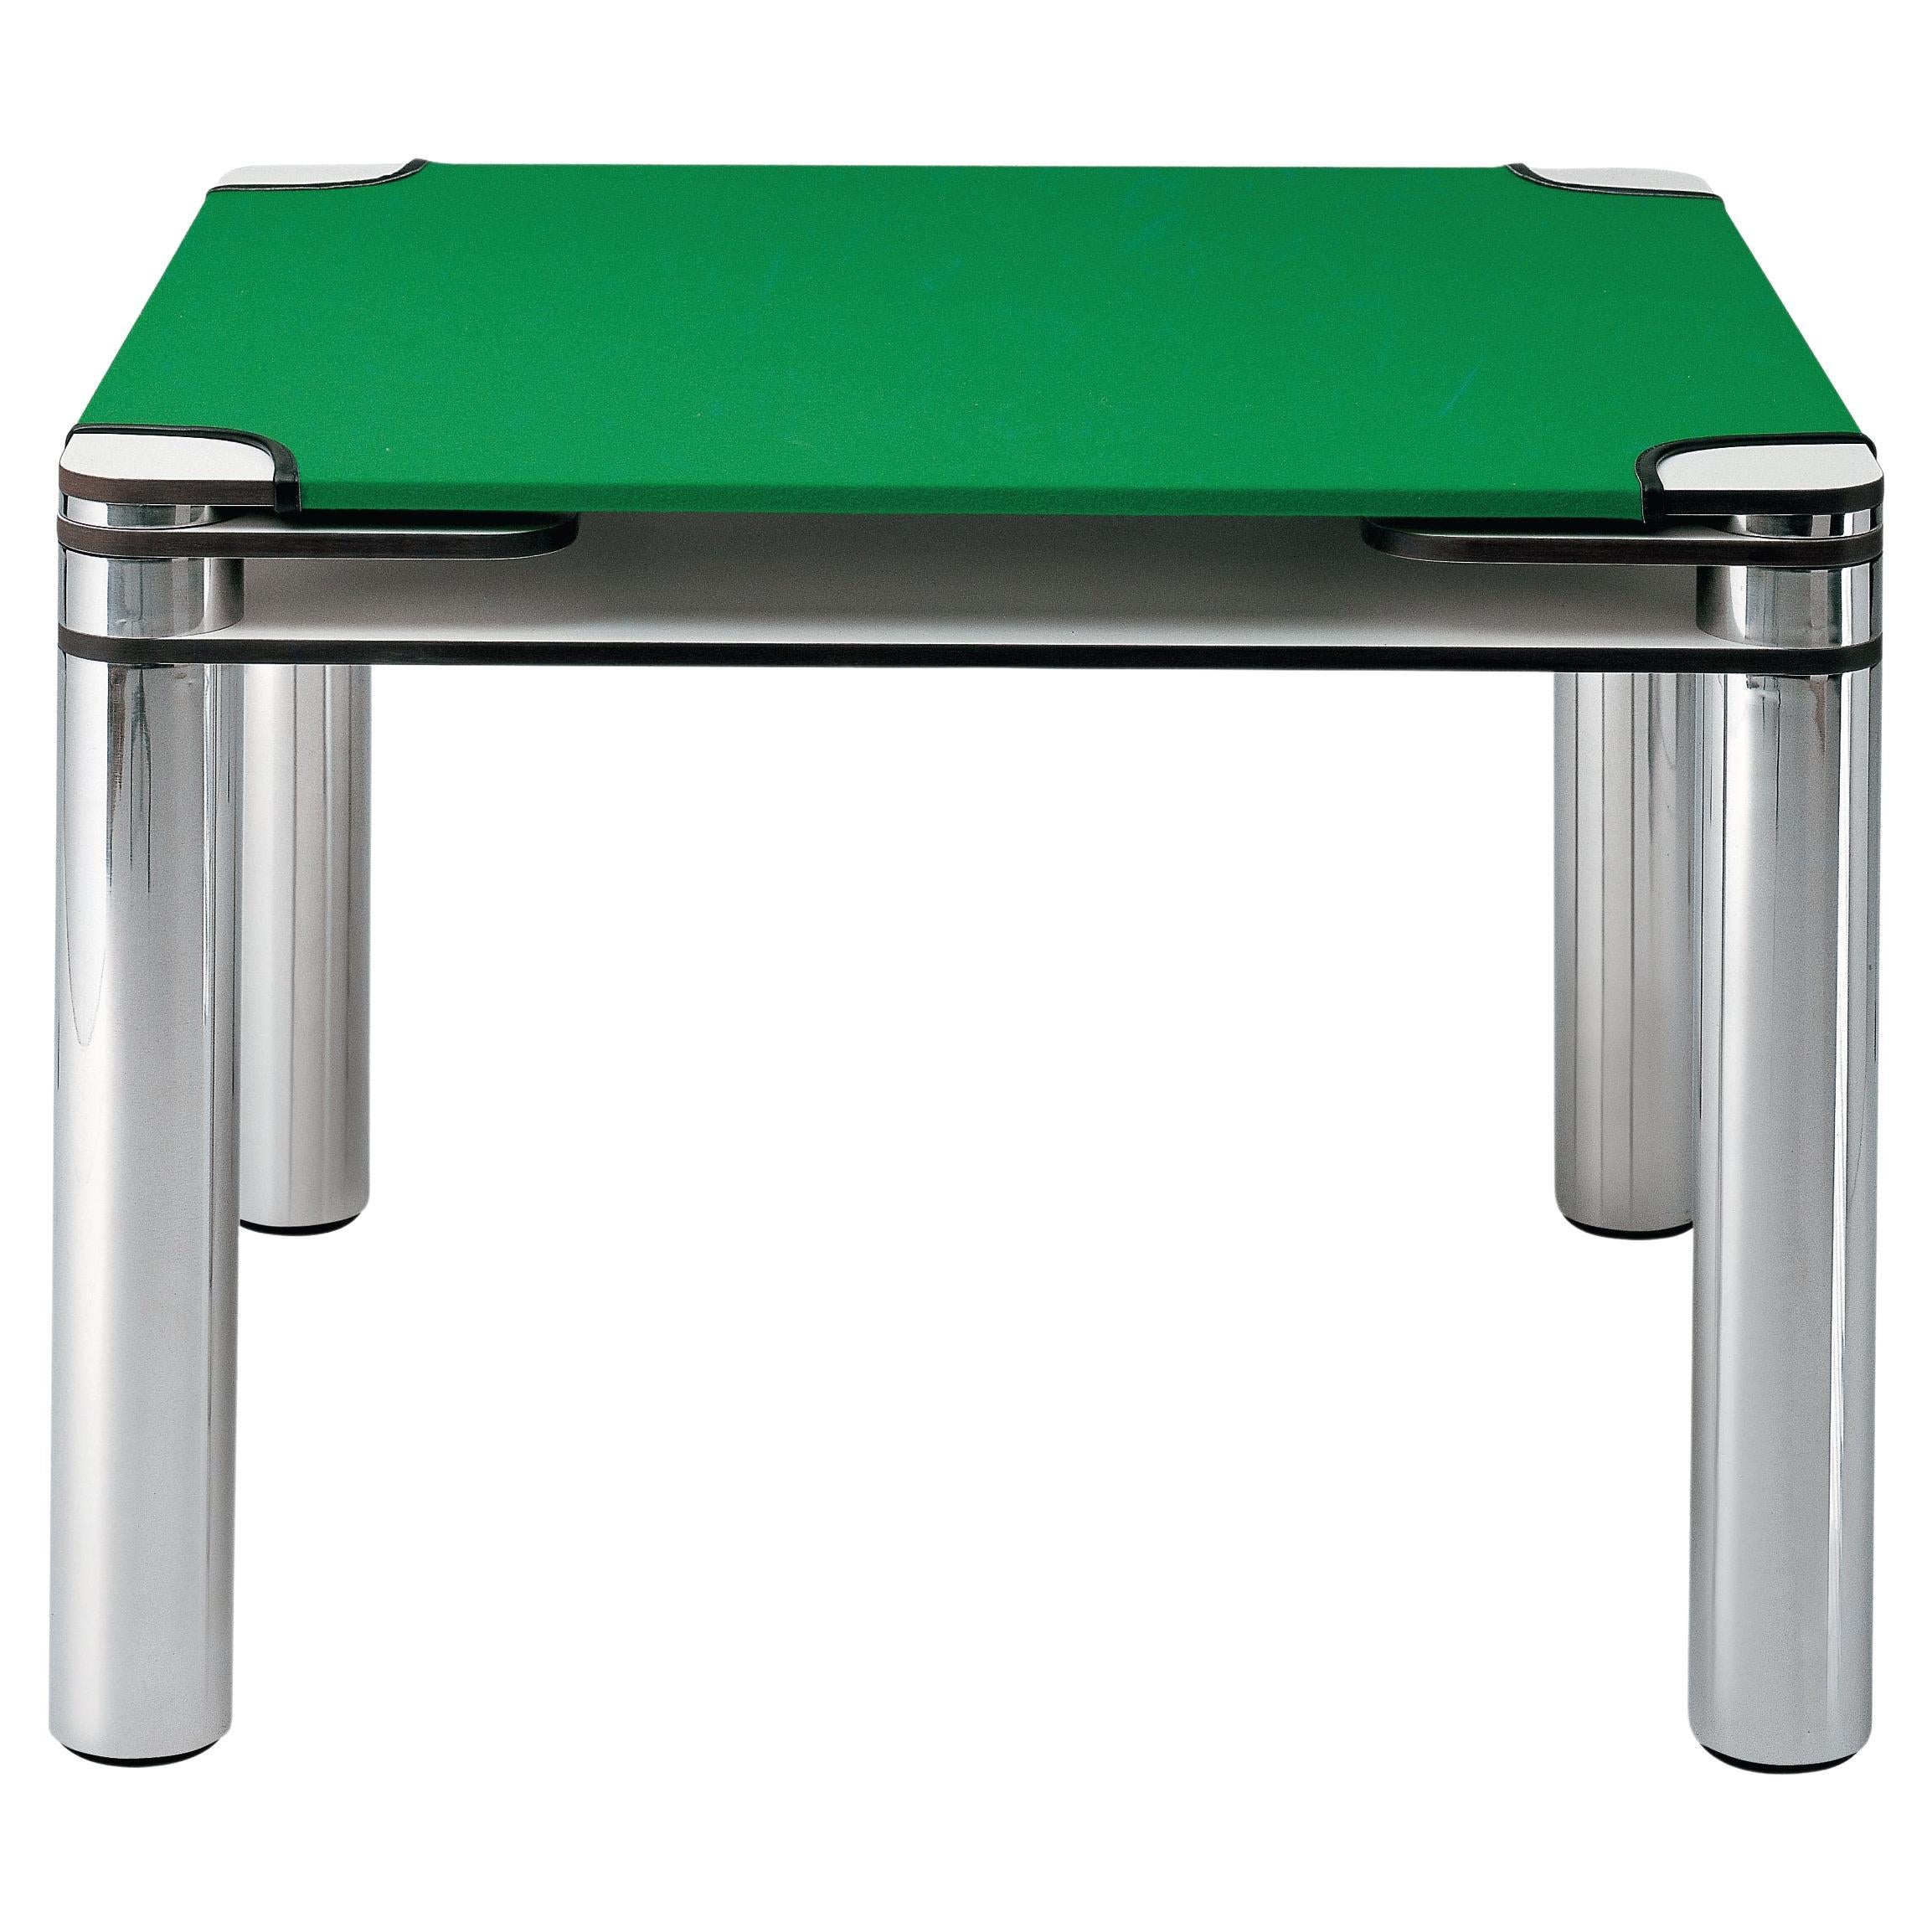 Zanotta Poker Card Table in Double Top White Plastic Laminate and Green Leather